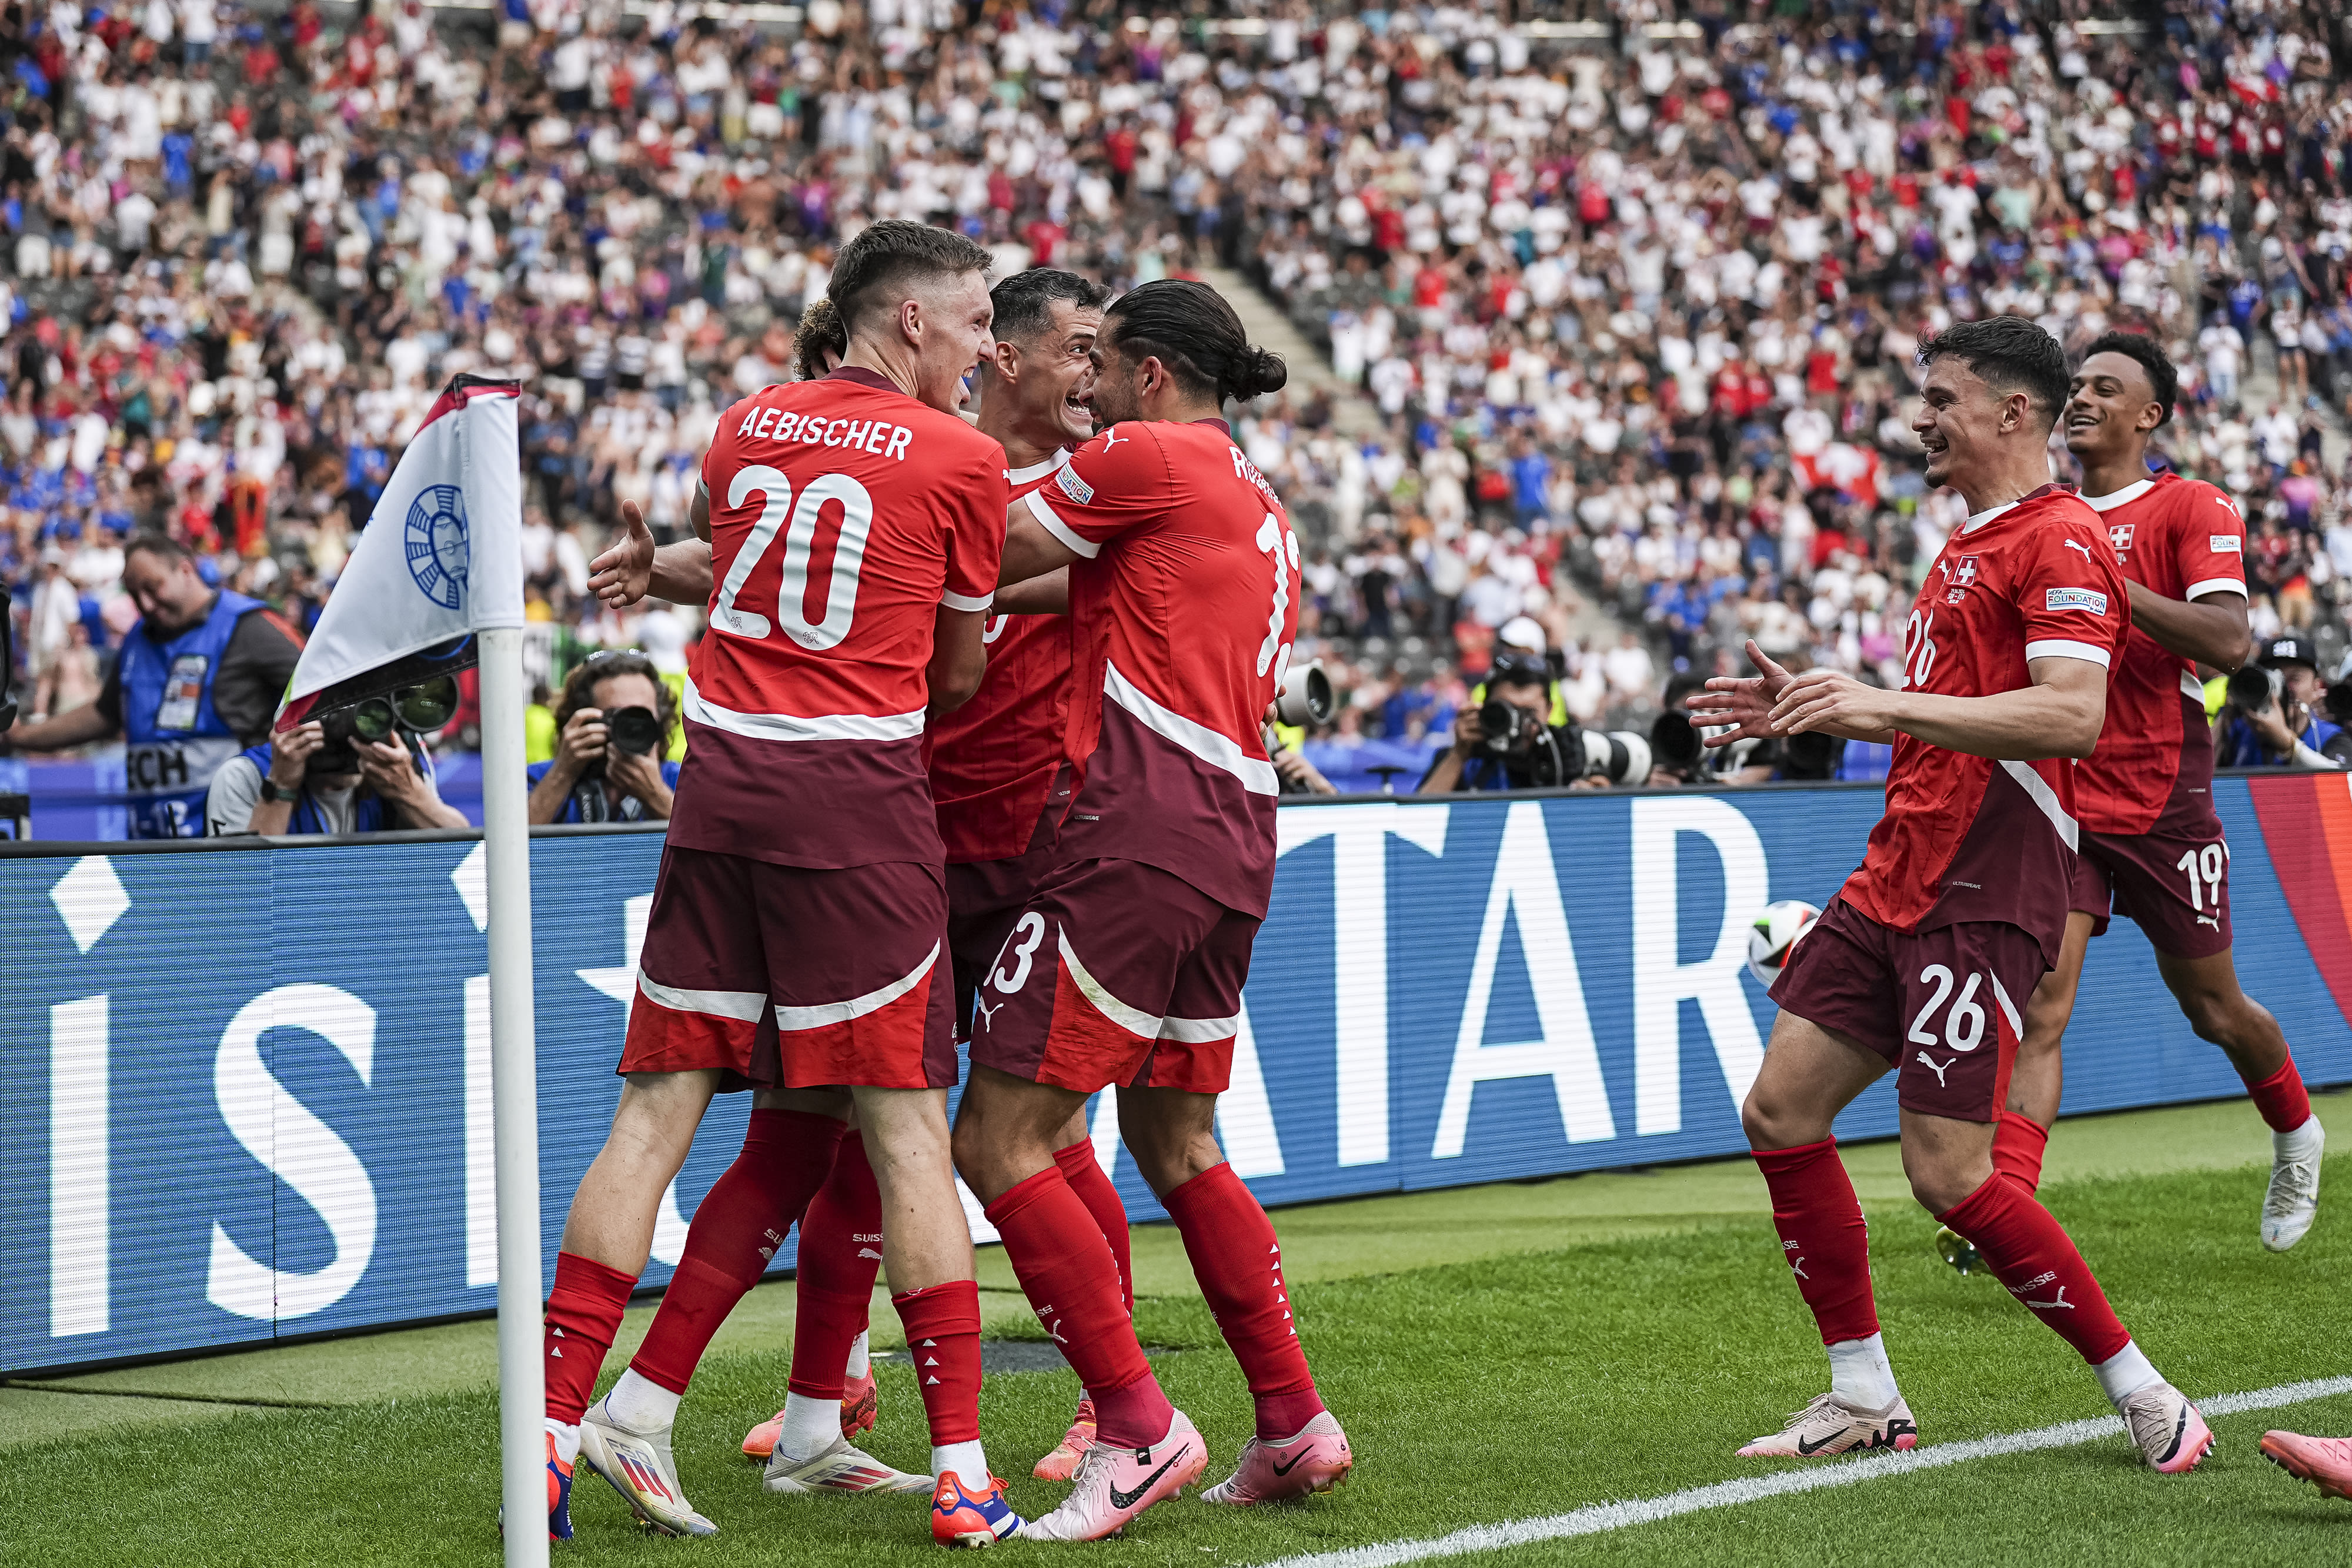 Euro 2024: Switzerland knocks out defending champions Italy; Germany advances past Denmark